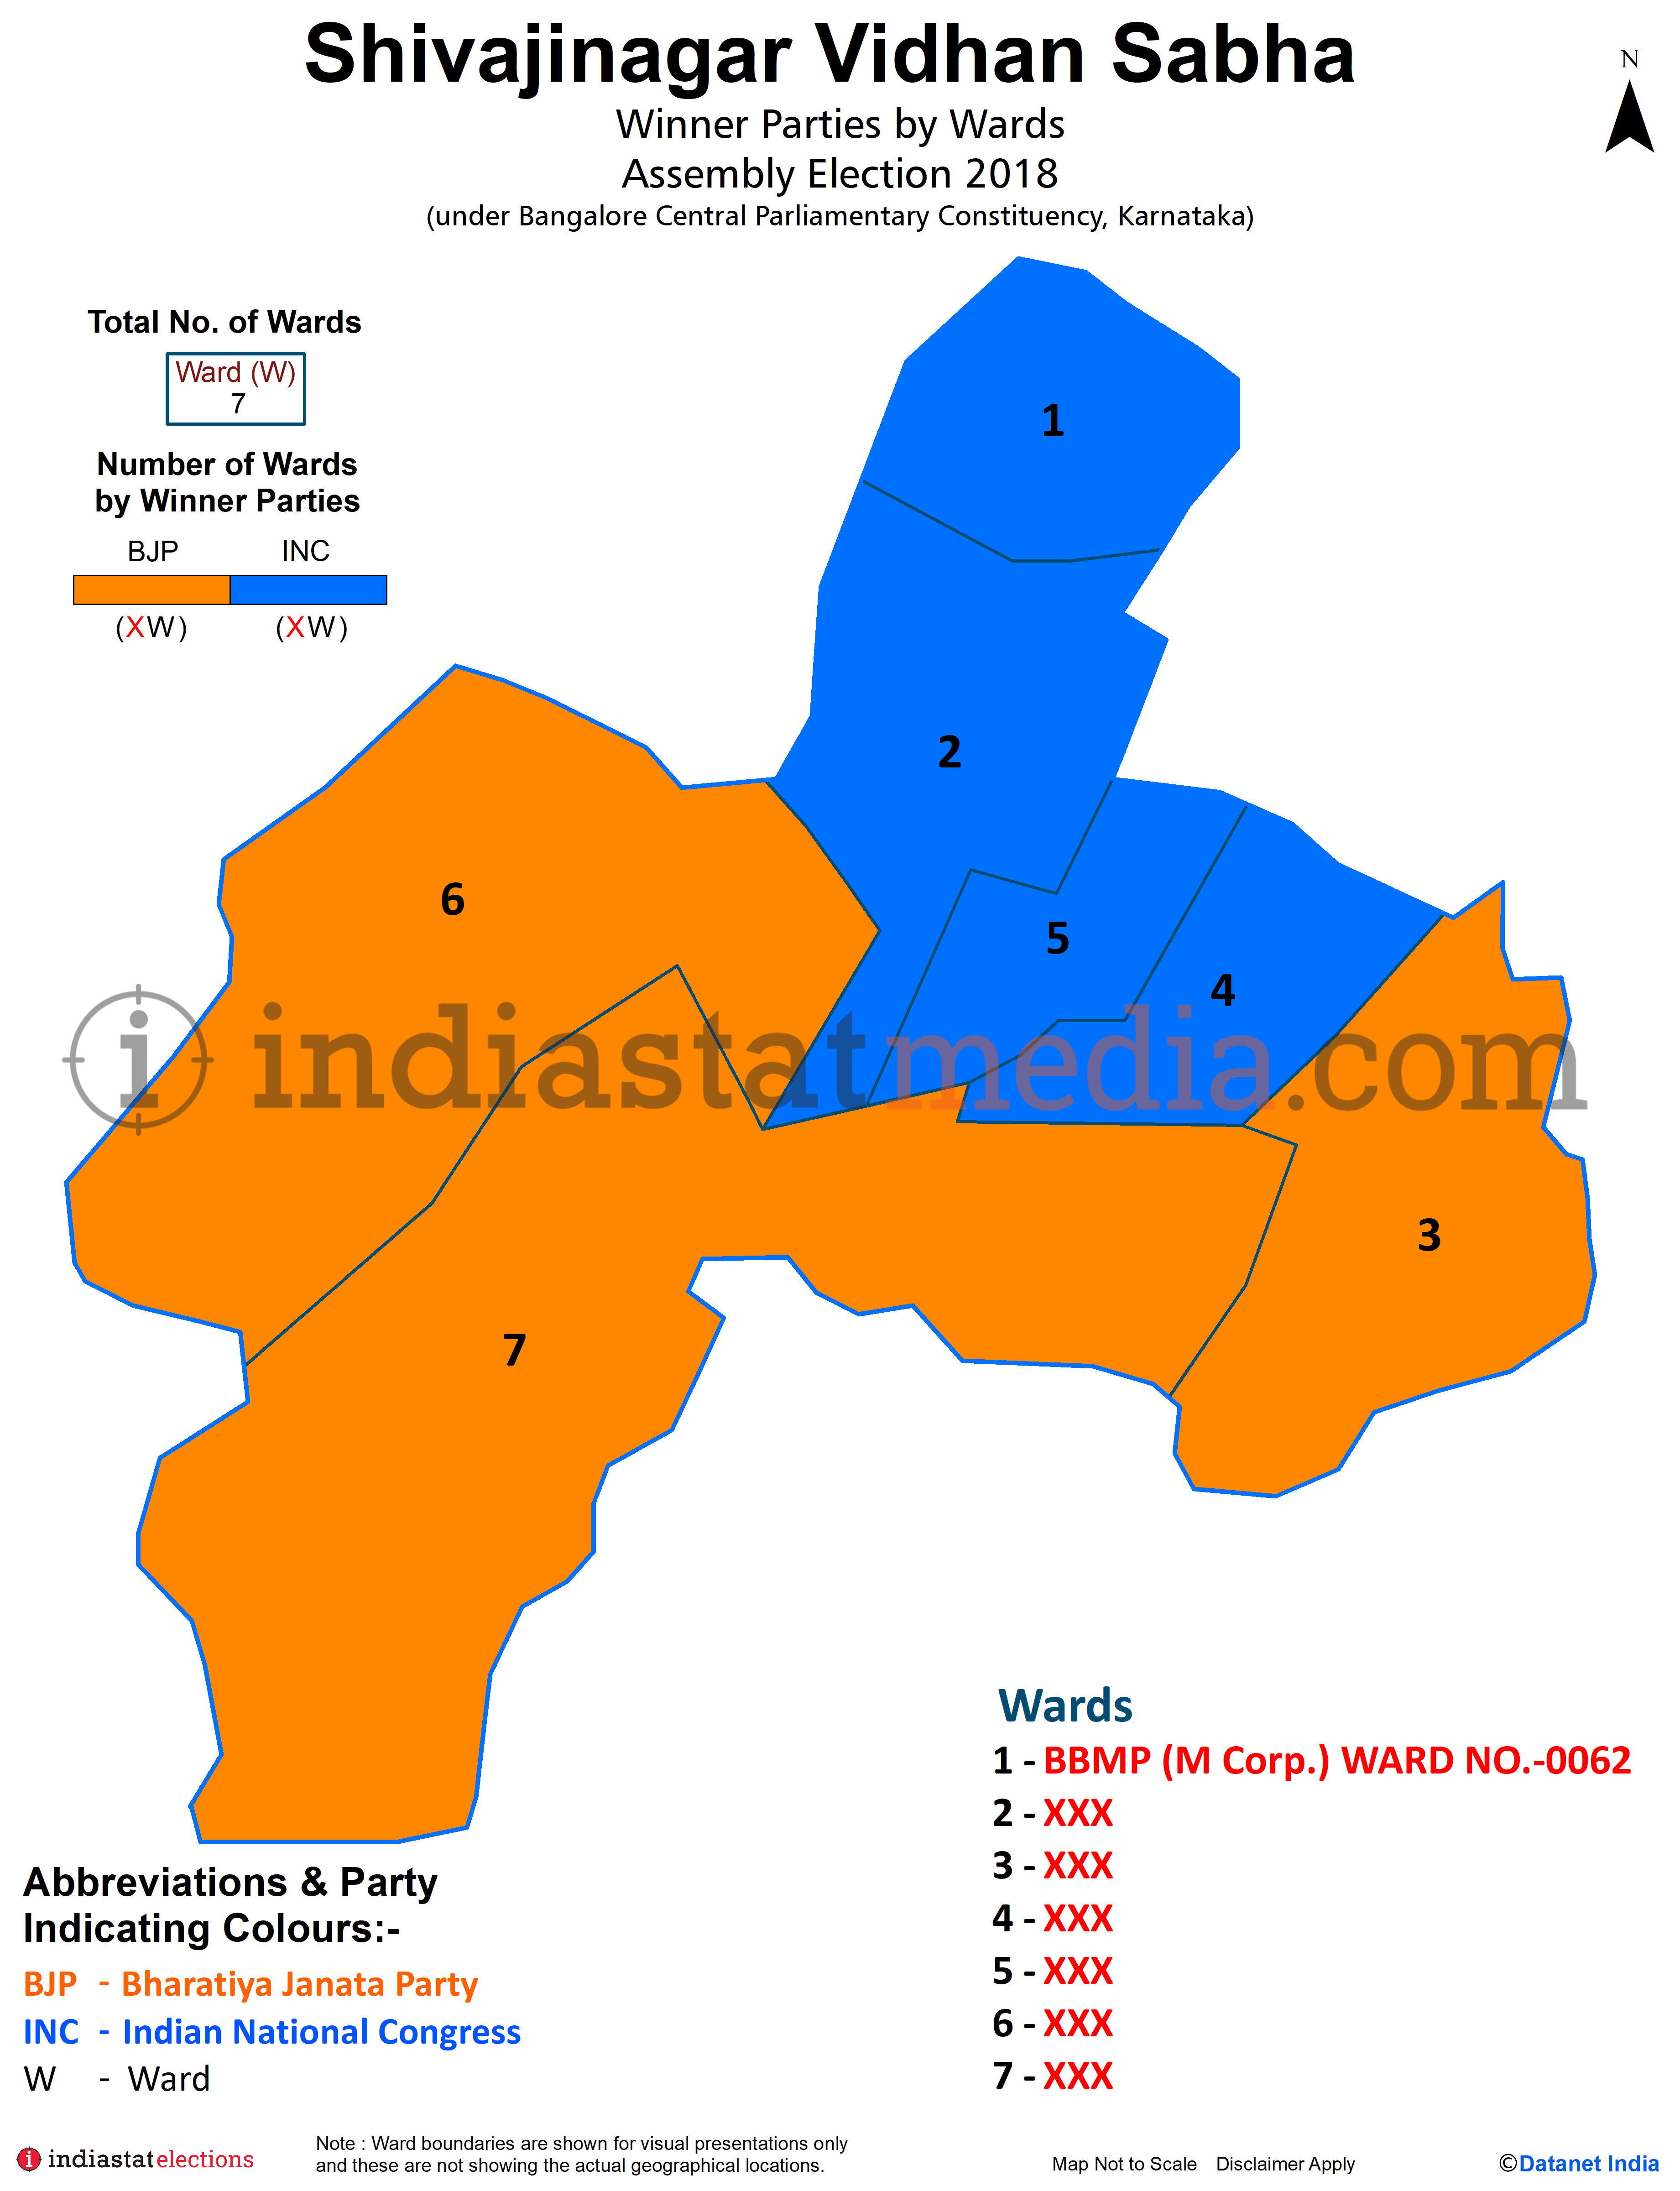 Winner Parties by Ward in Shivajinagar Assembly Constituency under Bangalore Central Parliamentary Constituency in Karnataka (Assembly Election - 2018)